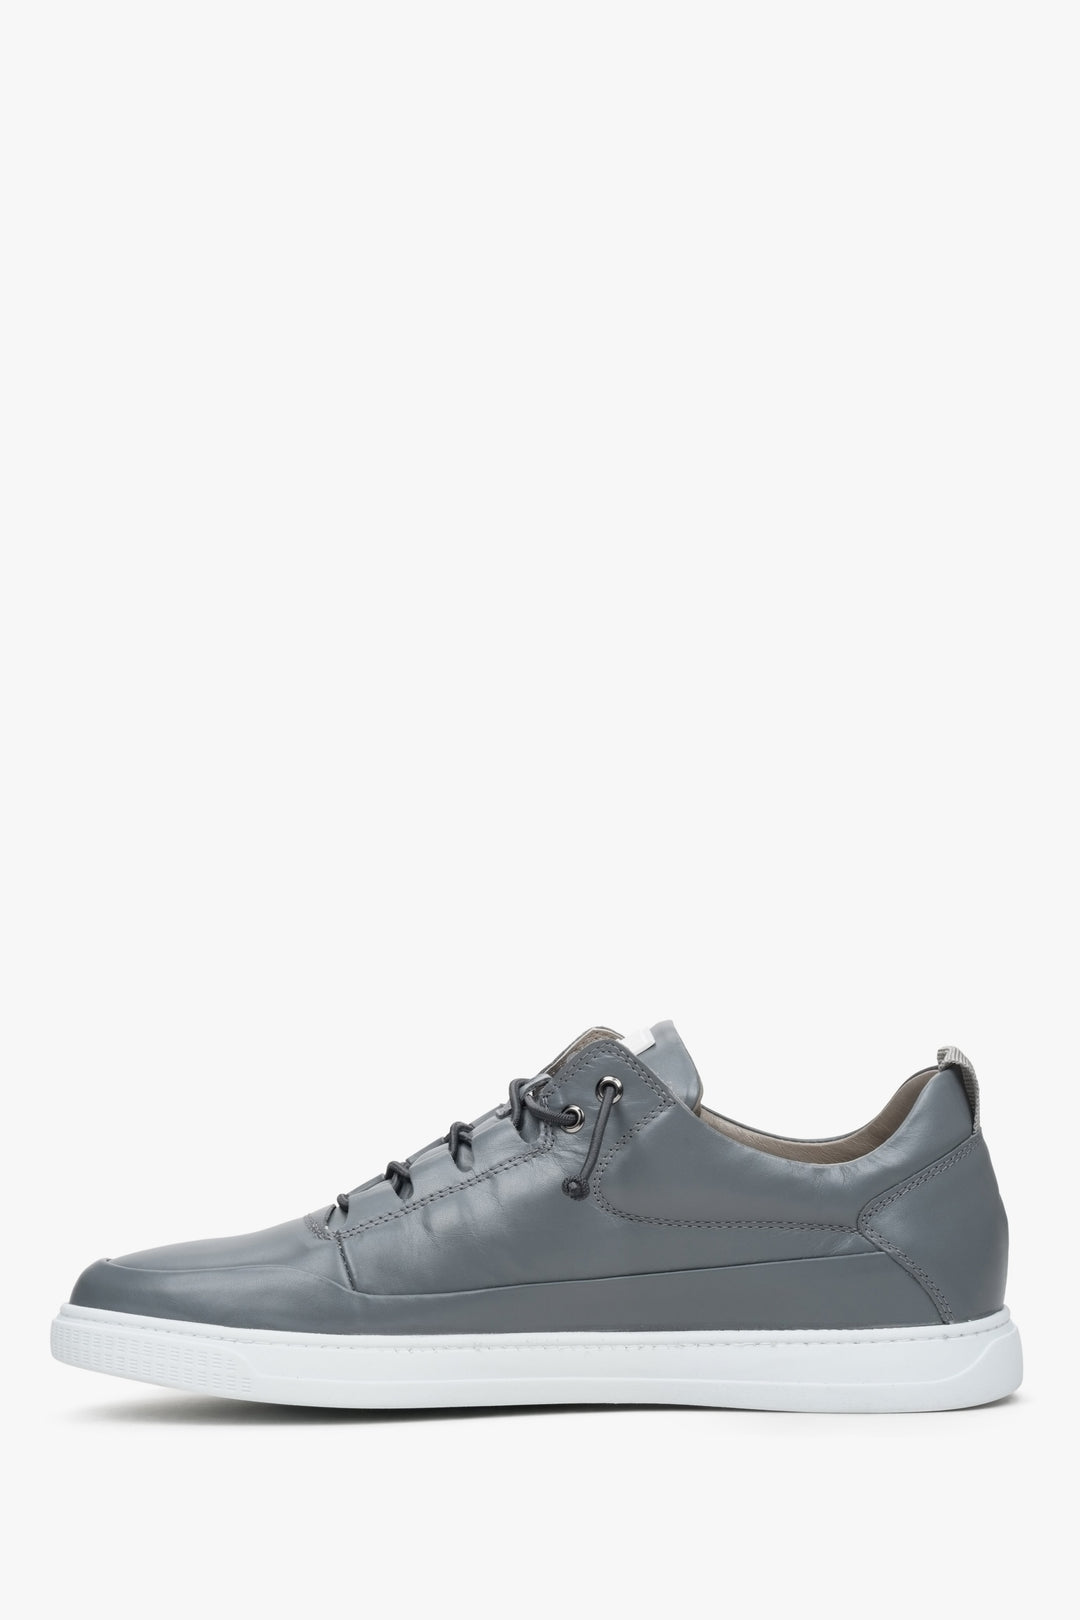 Men's grey sneakers ES 8 made of genuine leather for fall.